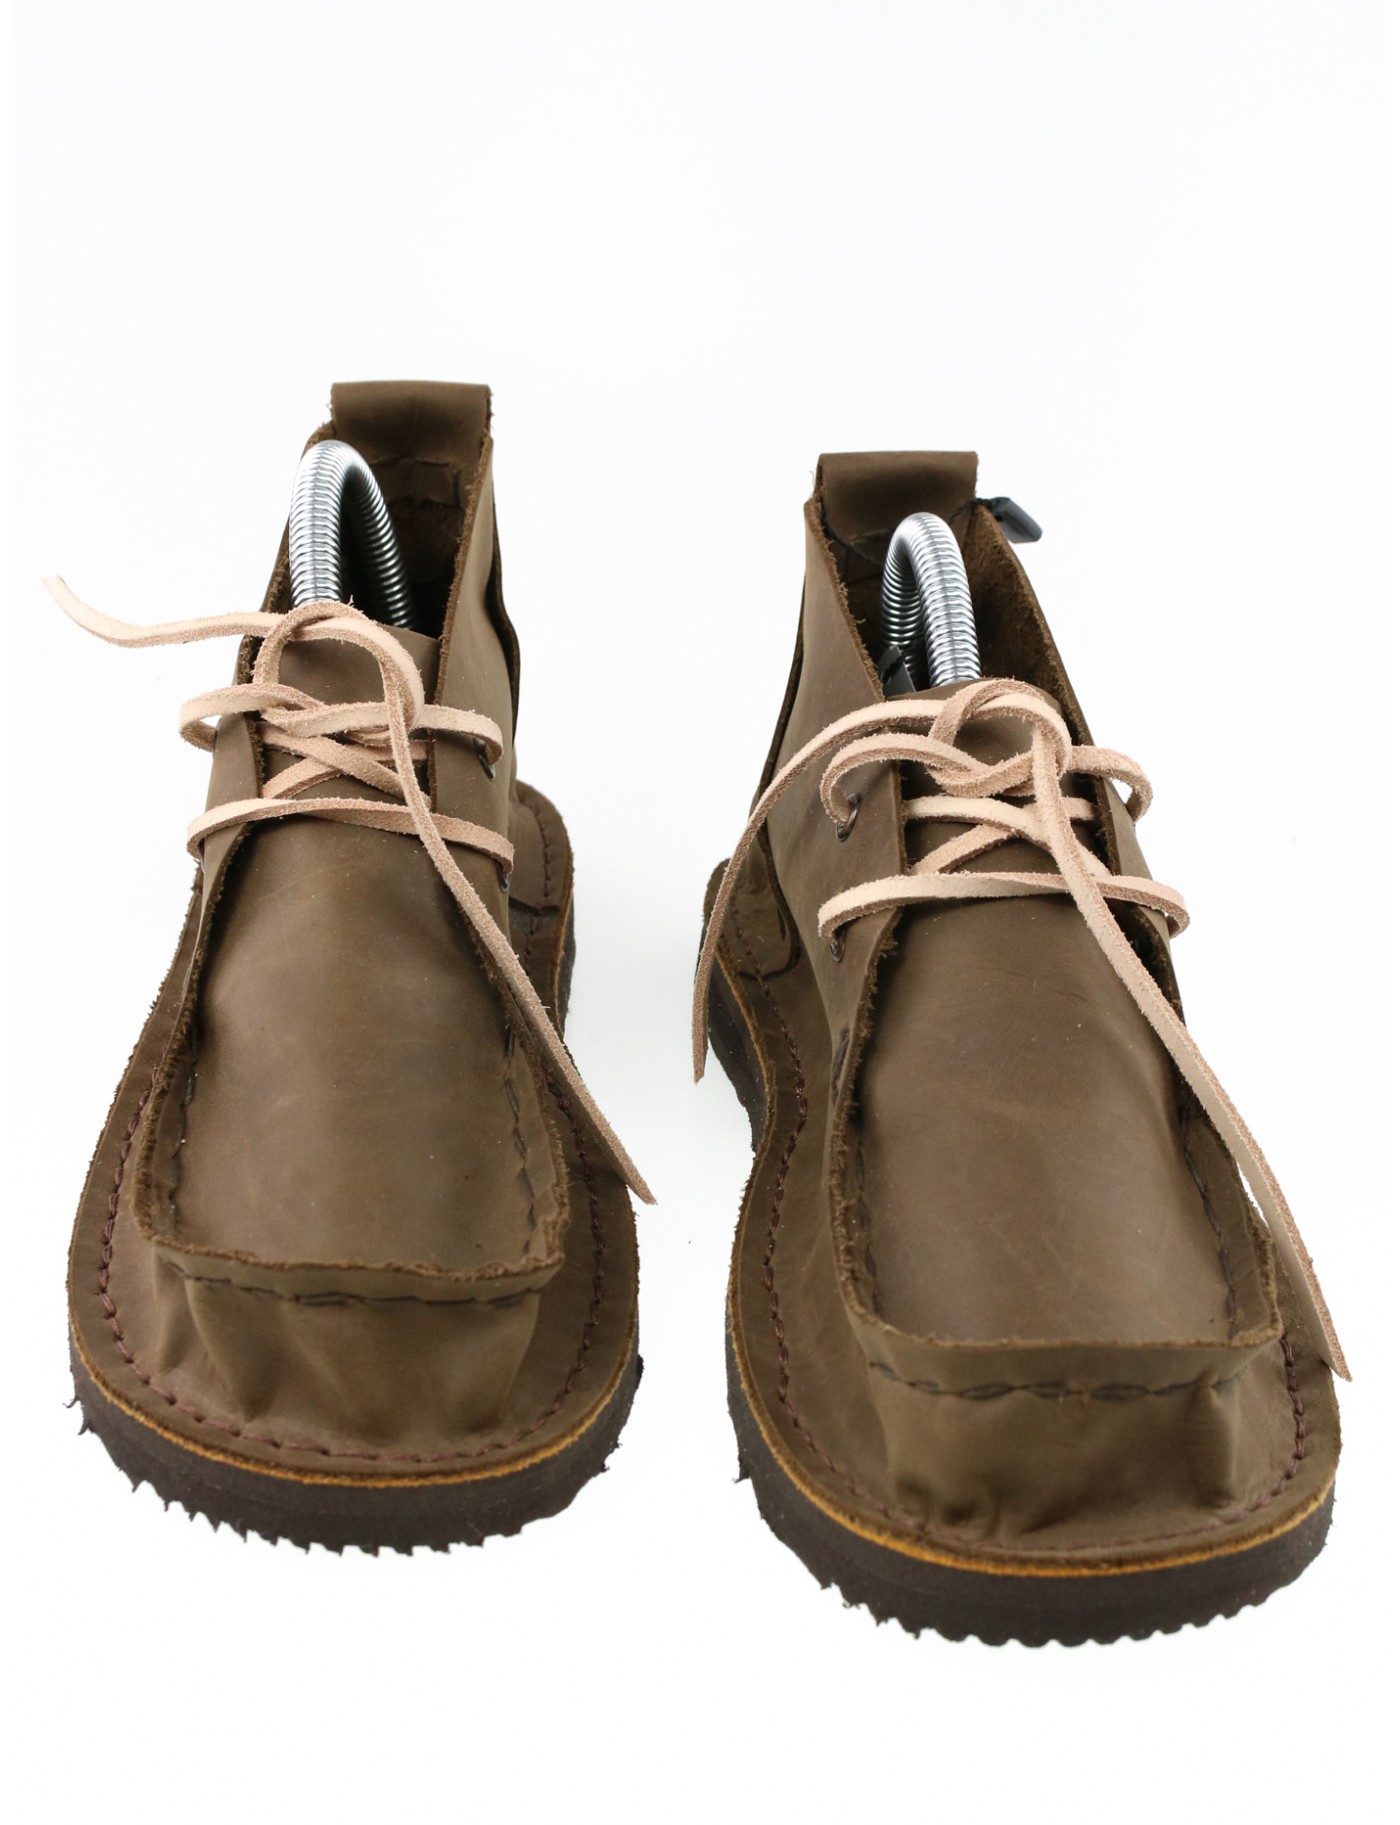 Brown moccasin shoes, sewn by hand.